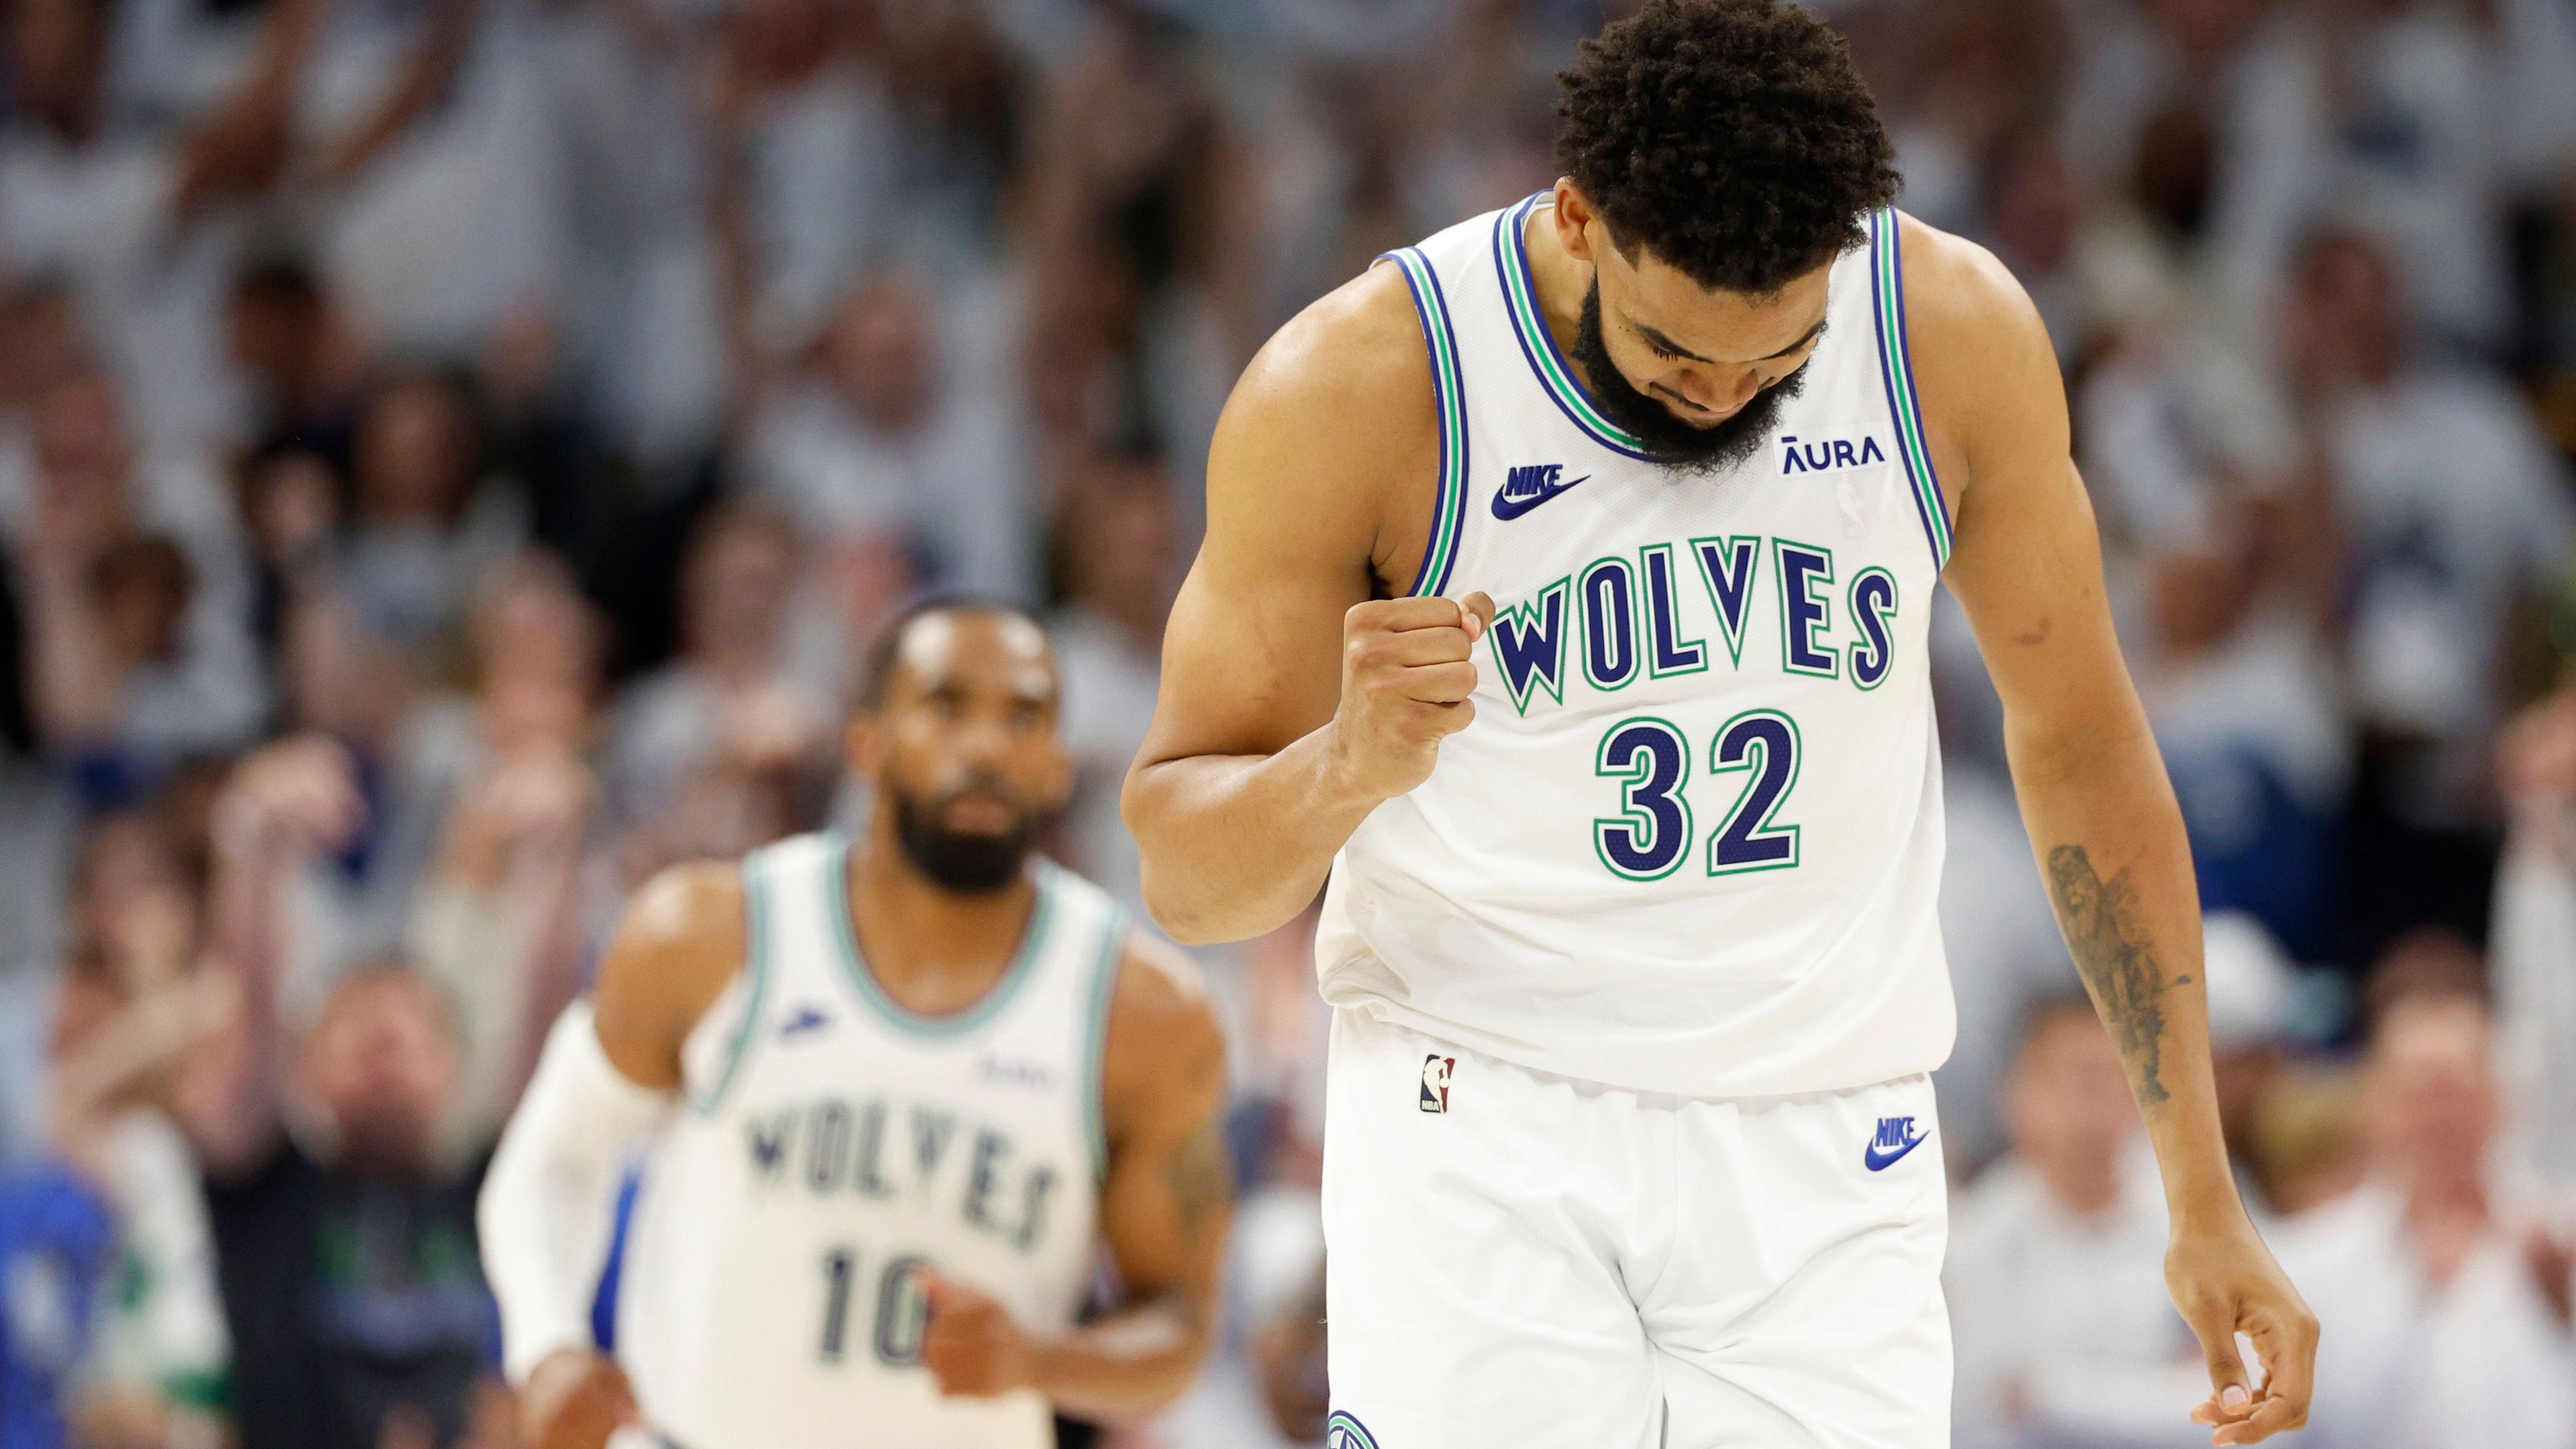 <strong>Karl-Anthony Towns (Minnesota Timberwolves)</strong><br>Kategorie: NBA Social Justice Champion<br>Position: Center/Forward<br>Stats Regular Season: 21,8 Punkte, 3,0 Assists, 8,3 Rebounds, 41,6 Prozent Dreierquote